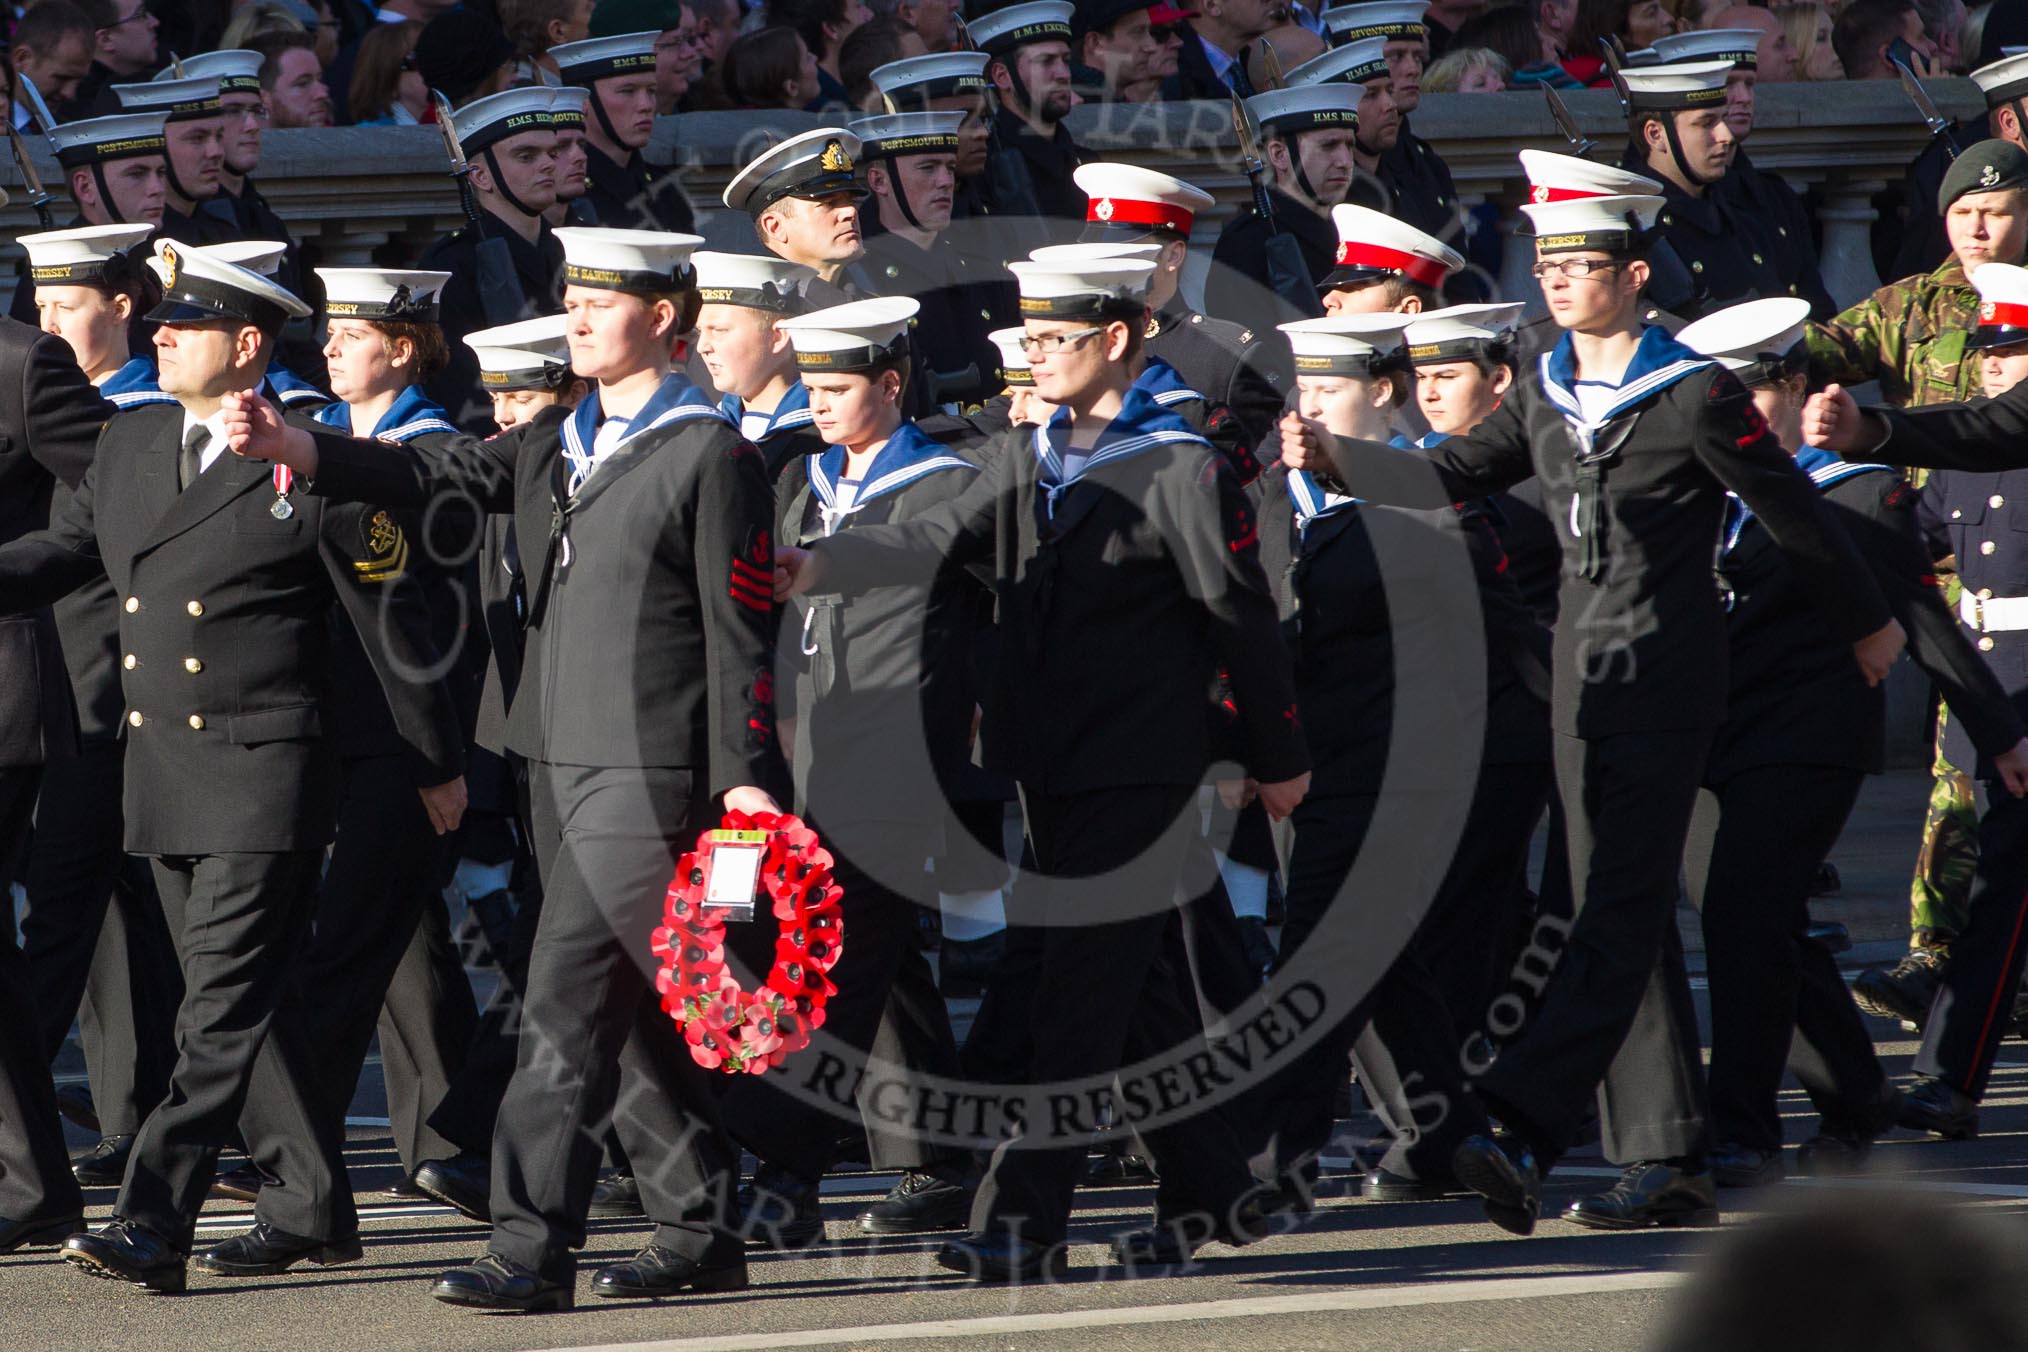 Remembrance Sunday 2012 Cenotaph March Past: Group M43 - Sea Cadet Corps..
Whitehall, Cenotaph,
London SW1,

United Kingdom,
on 11 November 2012 at 12:14, image #1676